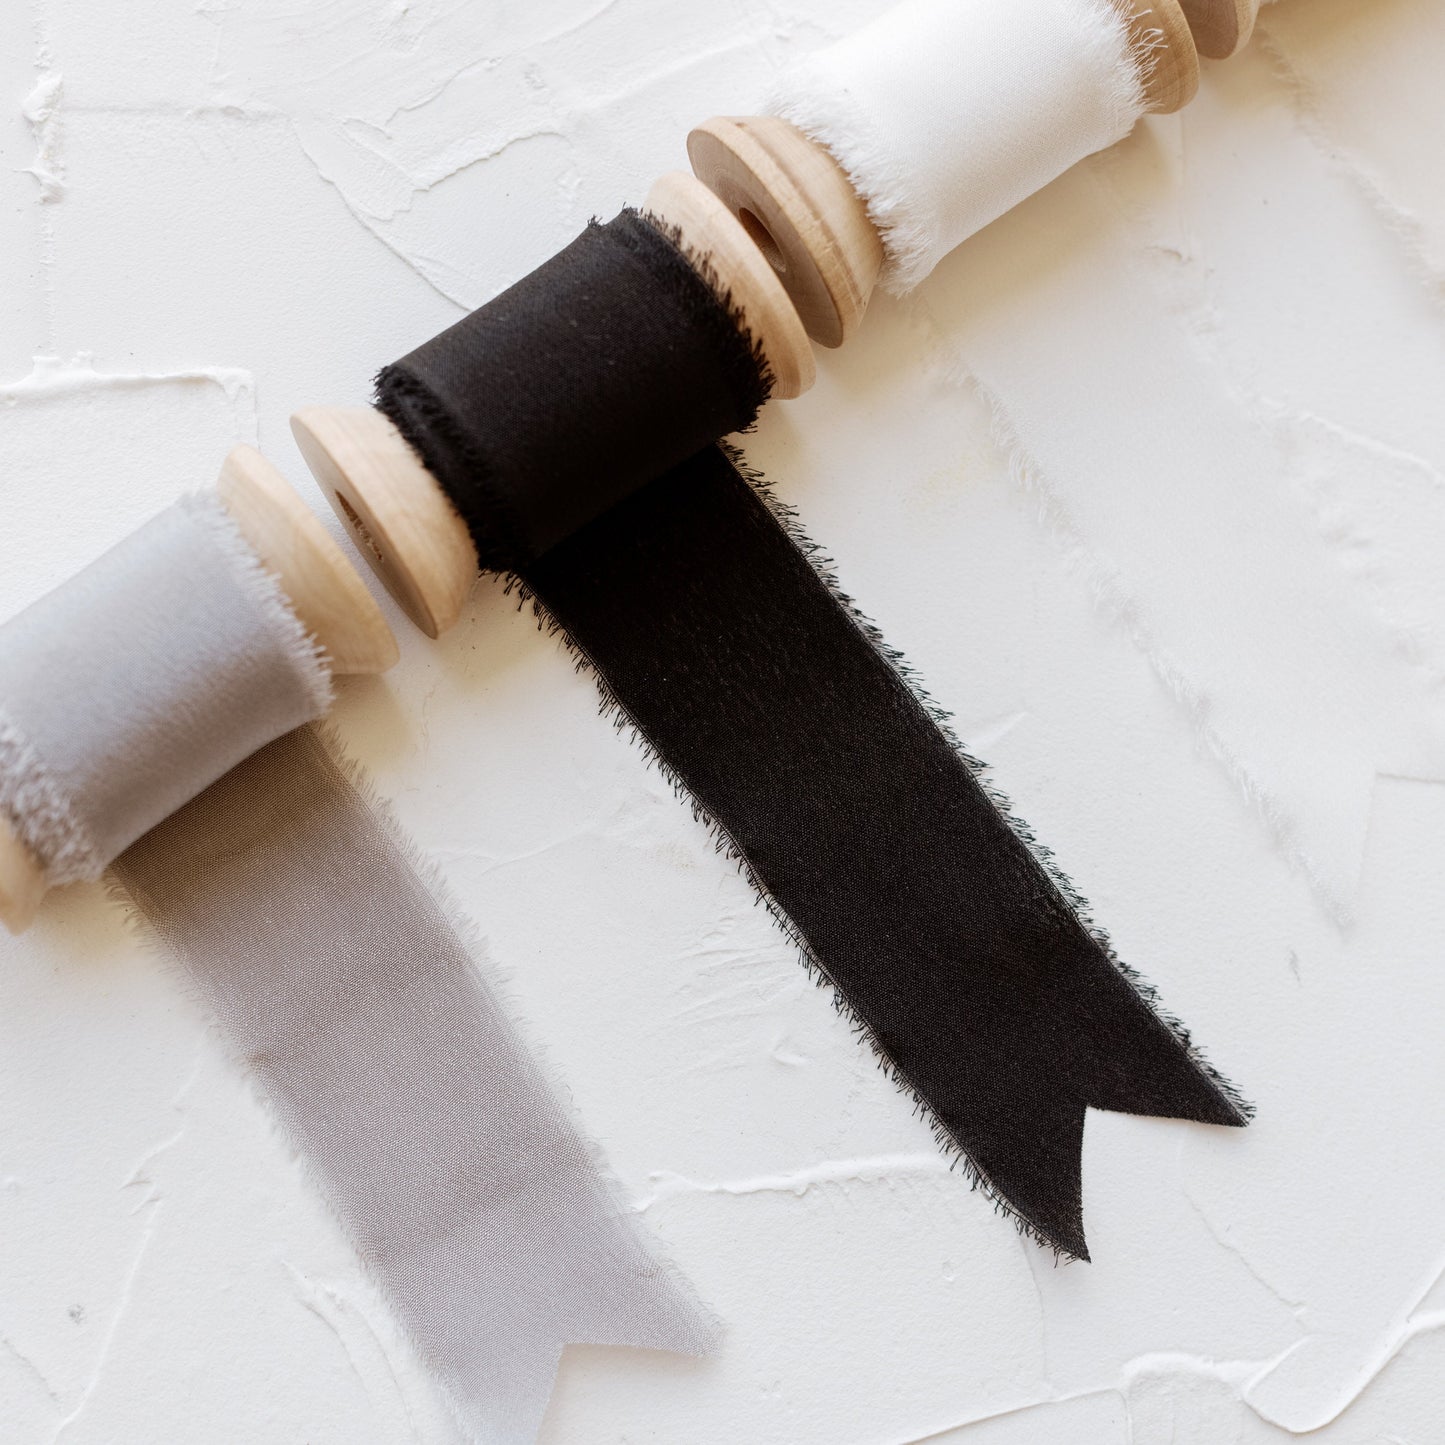 Set of 4 Nuetral Hues Frayed Edge Silk Ribbon with Wooden Spool Flat Lay Styling Ribbon white beige black gray